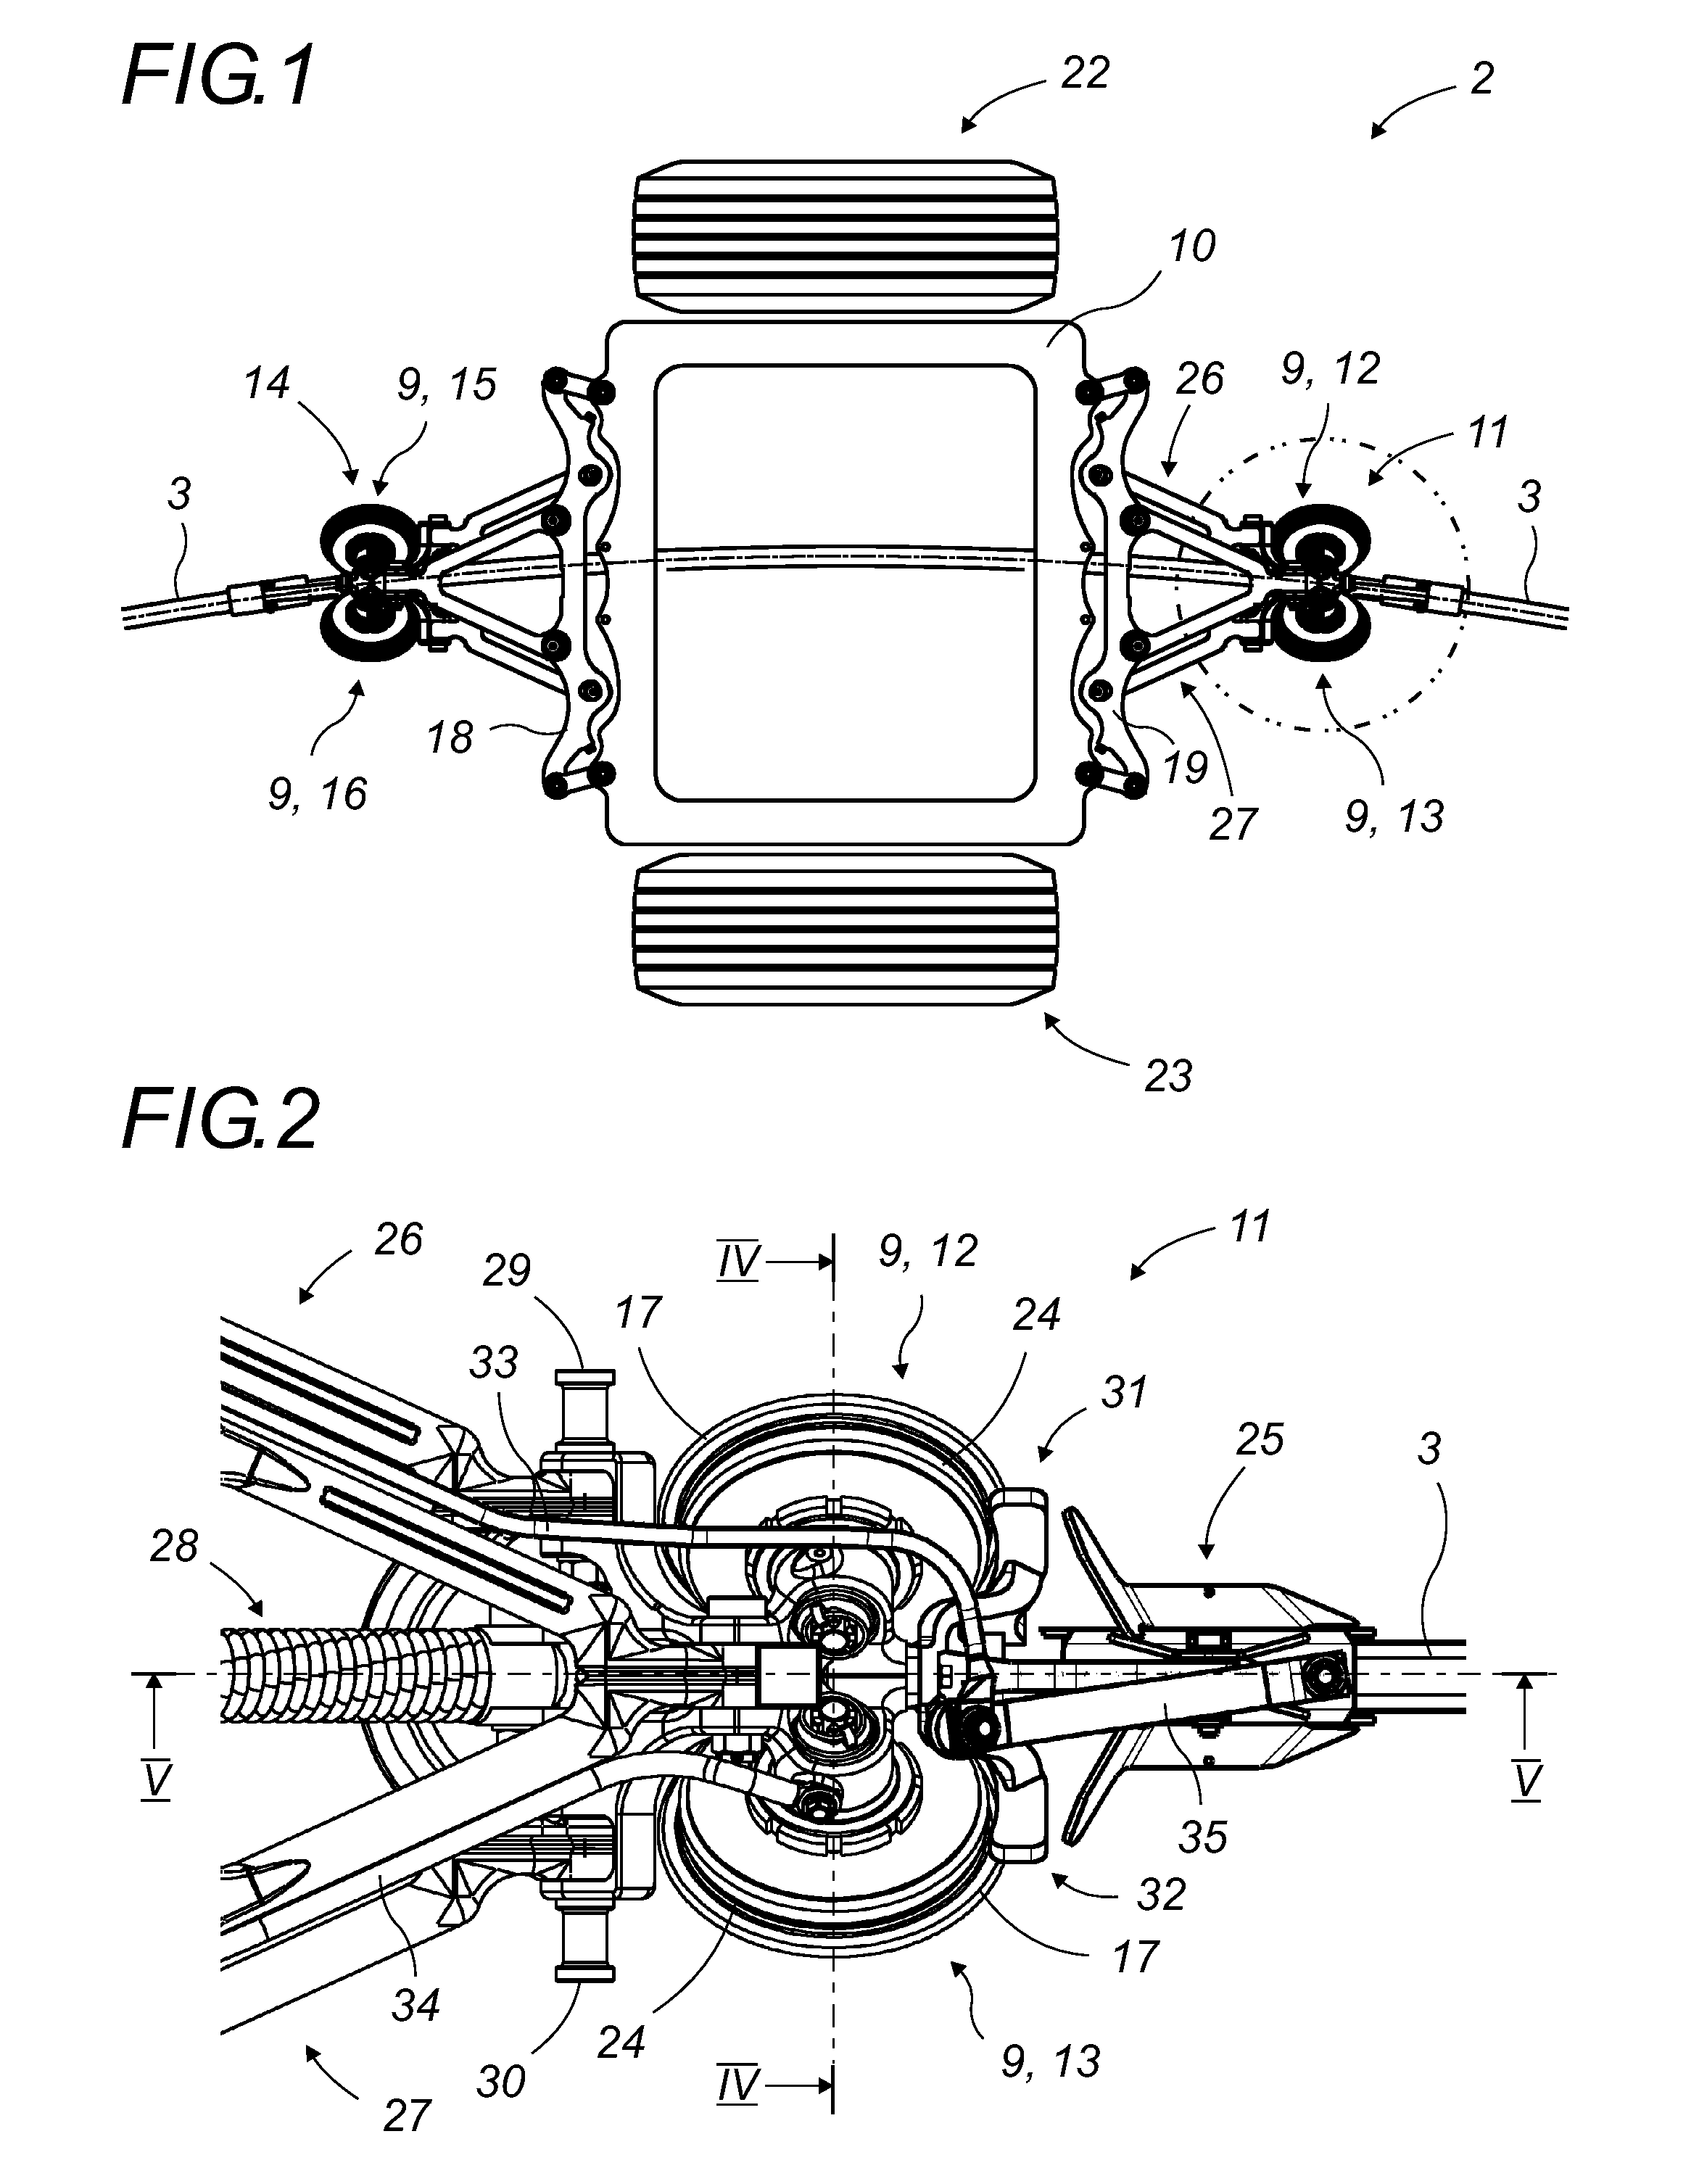 System For Dynamic Control Of The Rolling Of The Guide Roller(s) For An Assembly For Guiding A Vehicle Along At Least One Rail